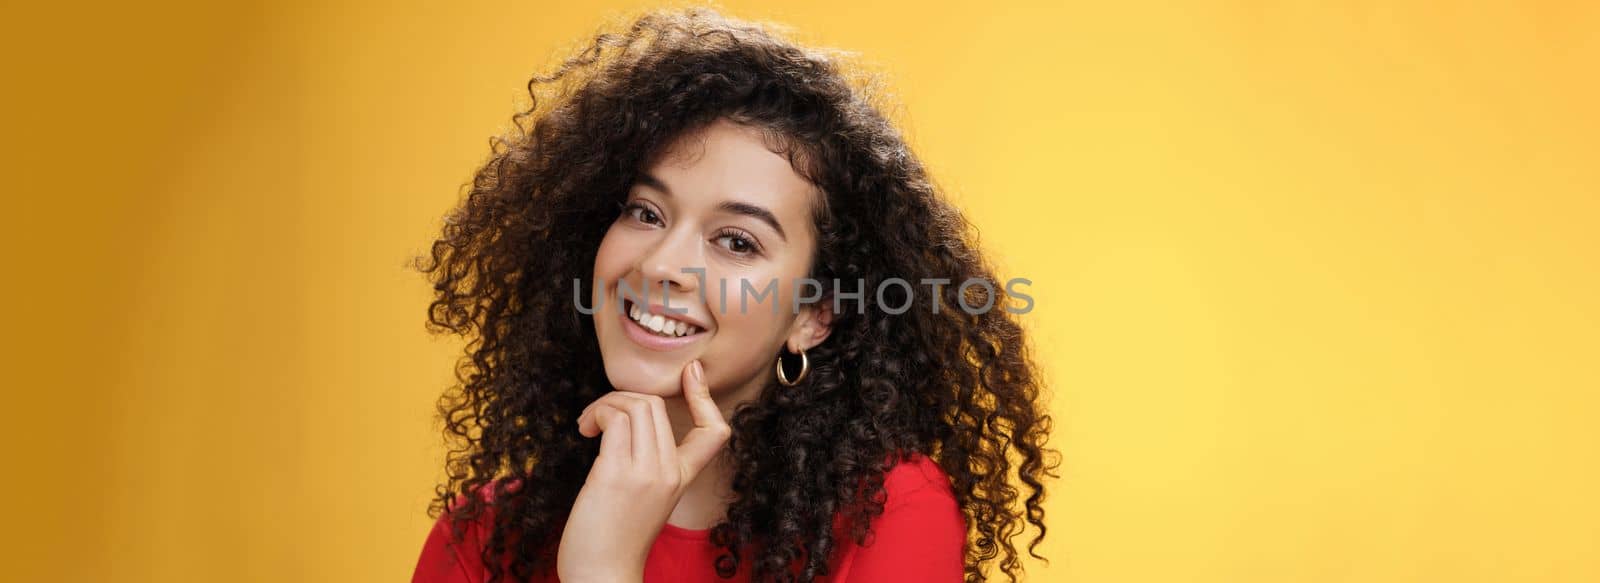 Lifestyle. Headshot of cute silly and tender feminine romantic woman with curly hairstyle touching lip with index finger making eyes at camera and smiling as using seduction skills over yellow background.